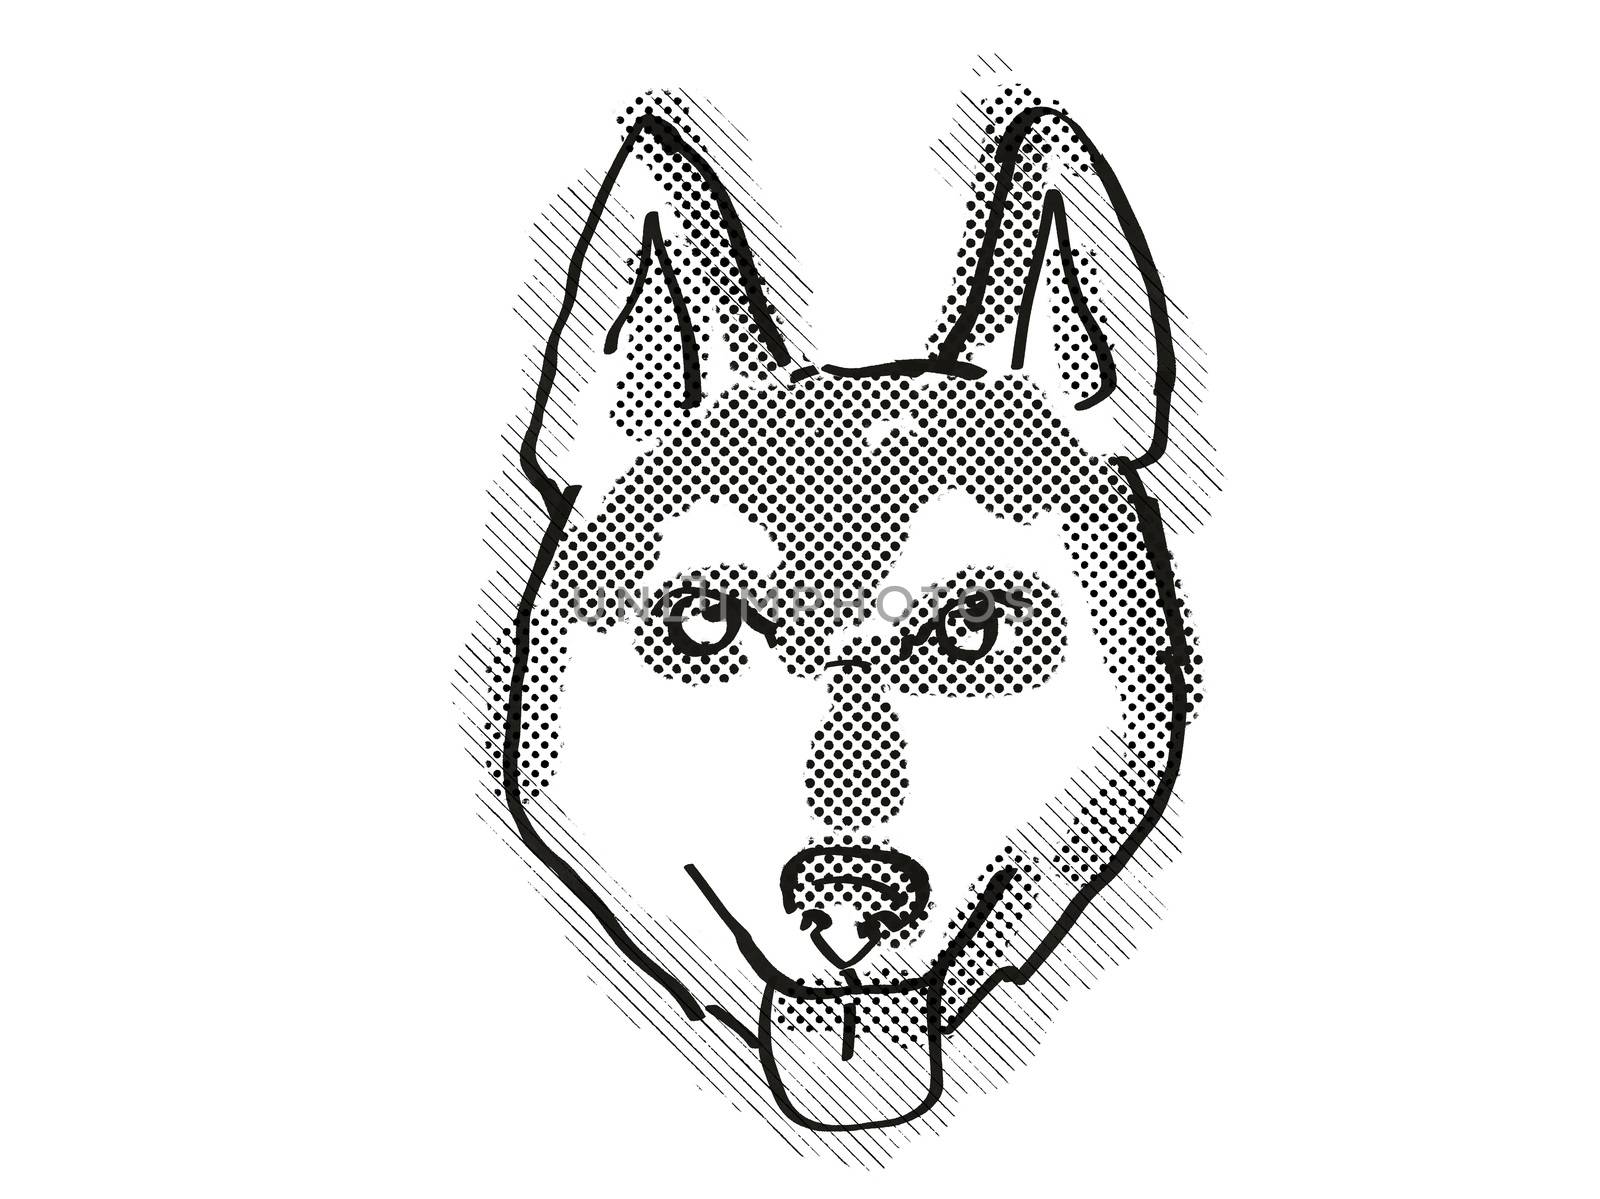 Retro cartoon style drawing of head of an Alaskan Klee Kai  , a domestic dog or canine breed on isolated white background done in black and white.